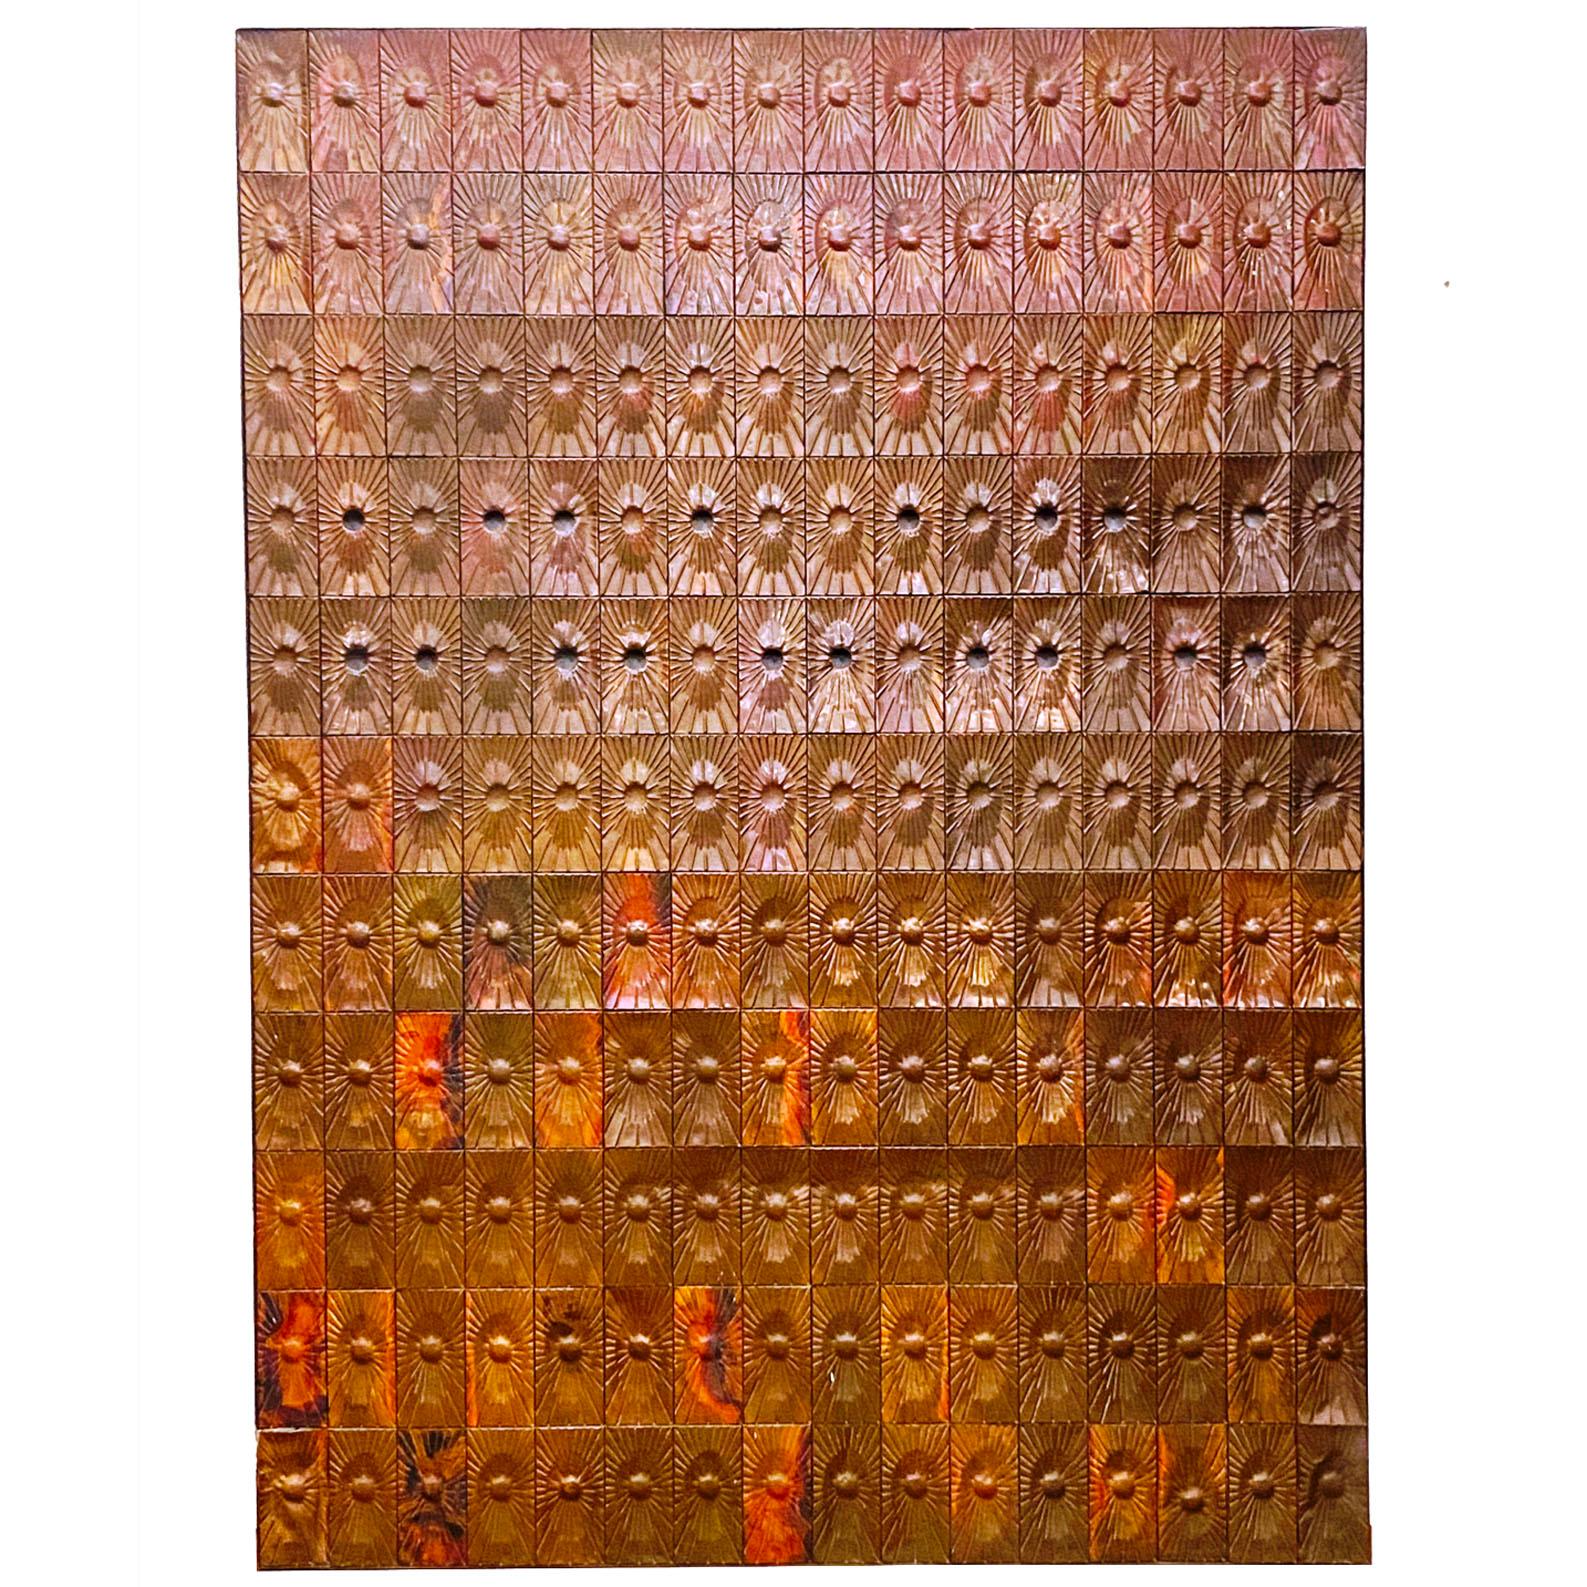 Copper Wall Panelling Cladding by Edit Oborzil, 1971 Art Object Panel 5